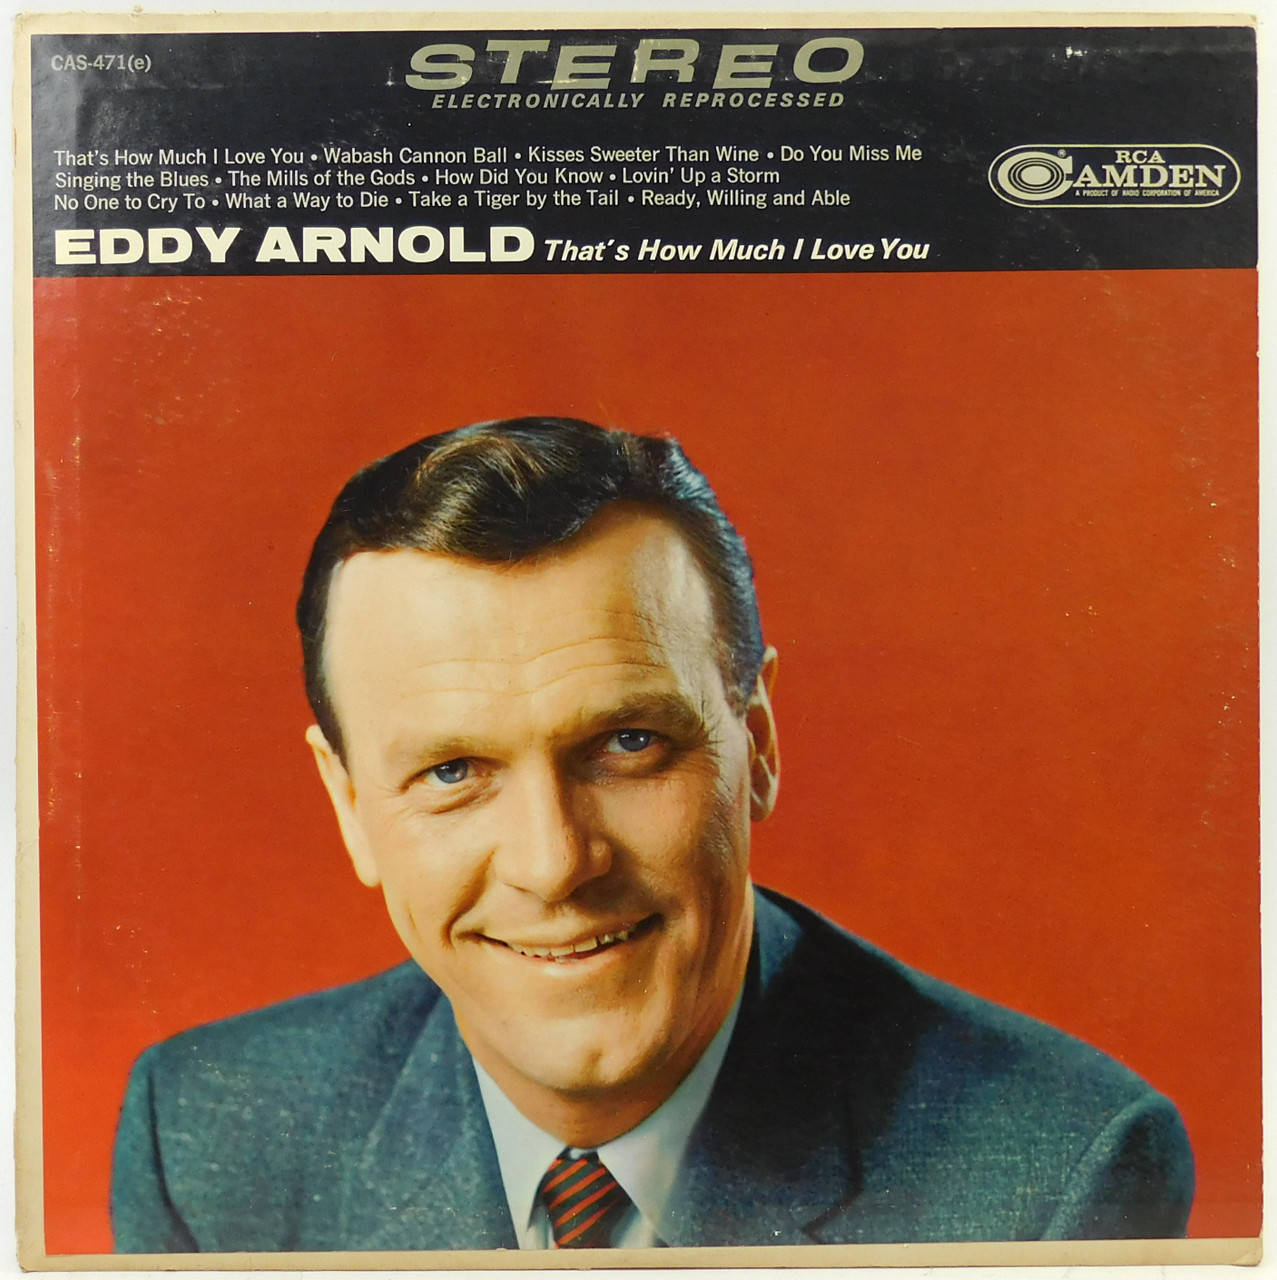 Eddy Arnold's Vinyl Cover "That's How Much I Love" Wallpaper